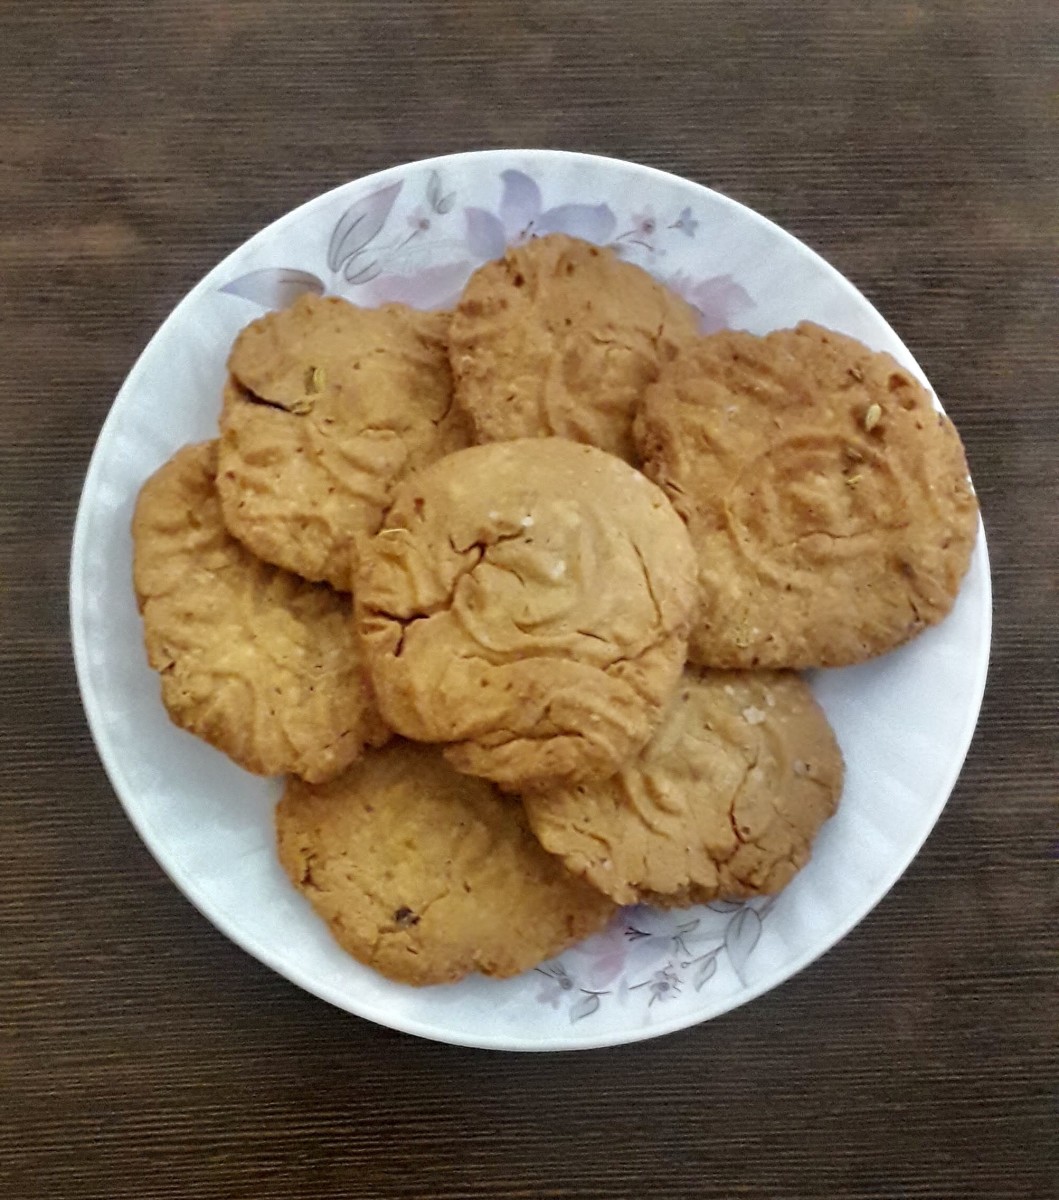 Thekua is a traditional Indian festival sweet. It is known as thekua in Bihar, and khajur in Uttar Pradesh. It is offered as Prasad in Chath and Teej puja festivals. 